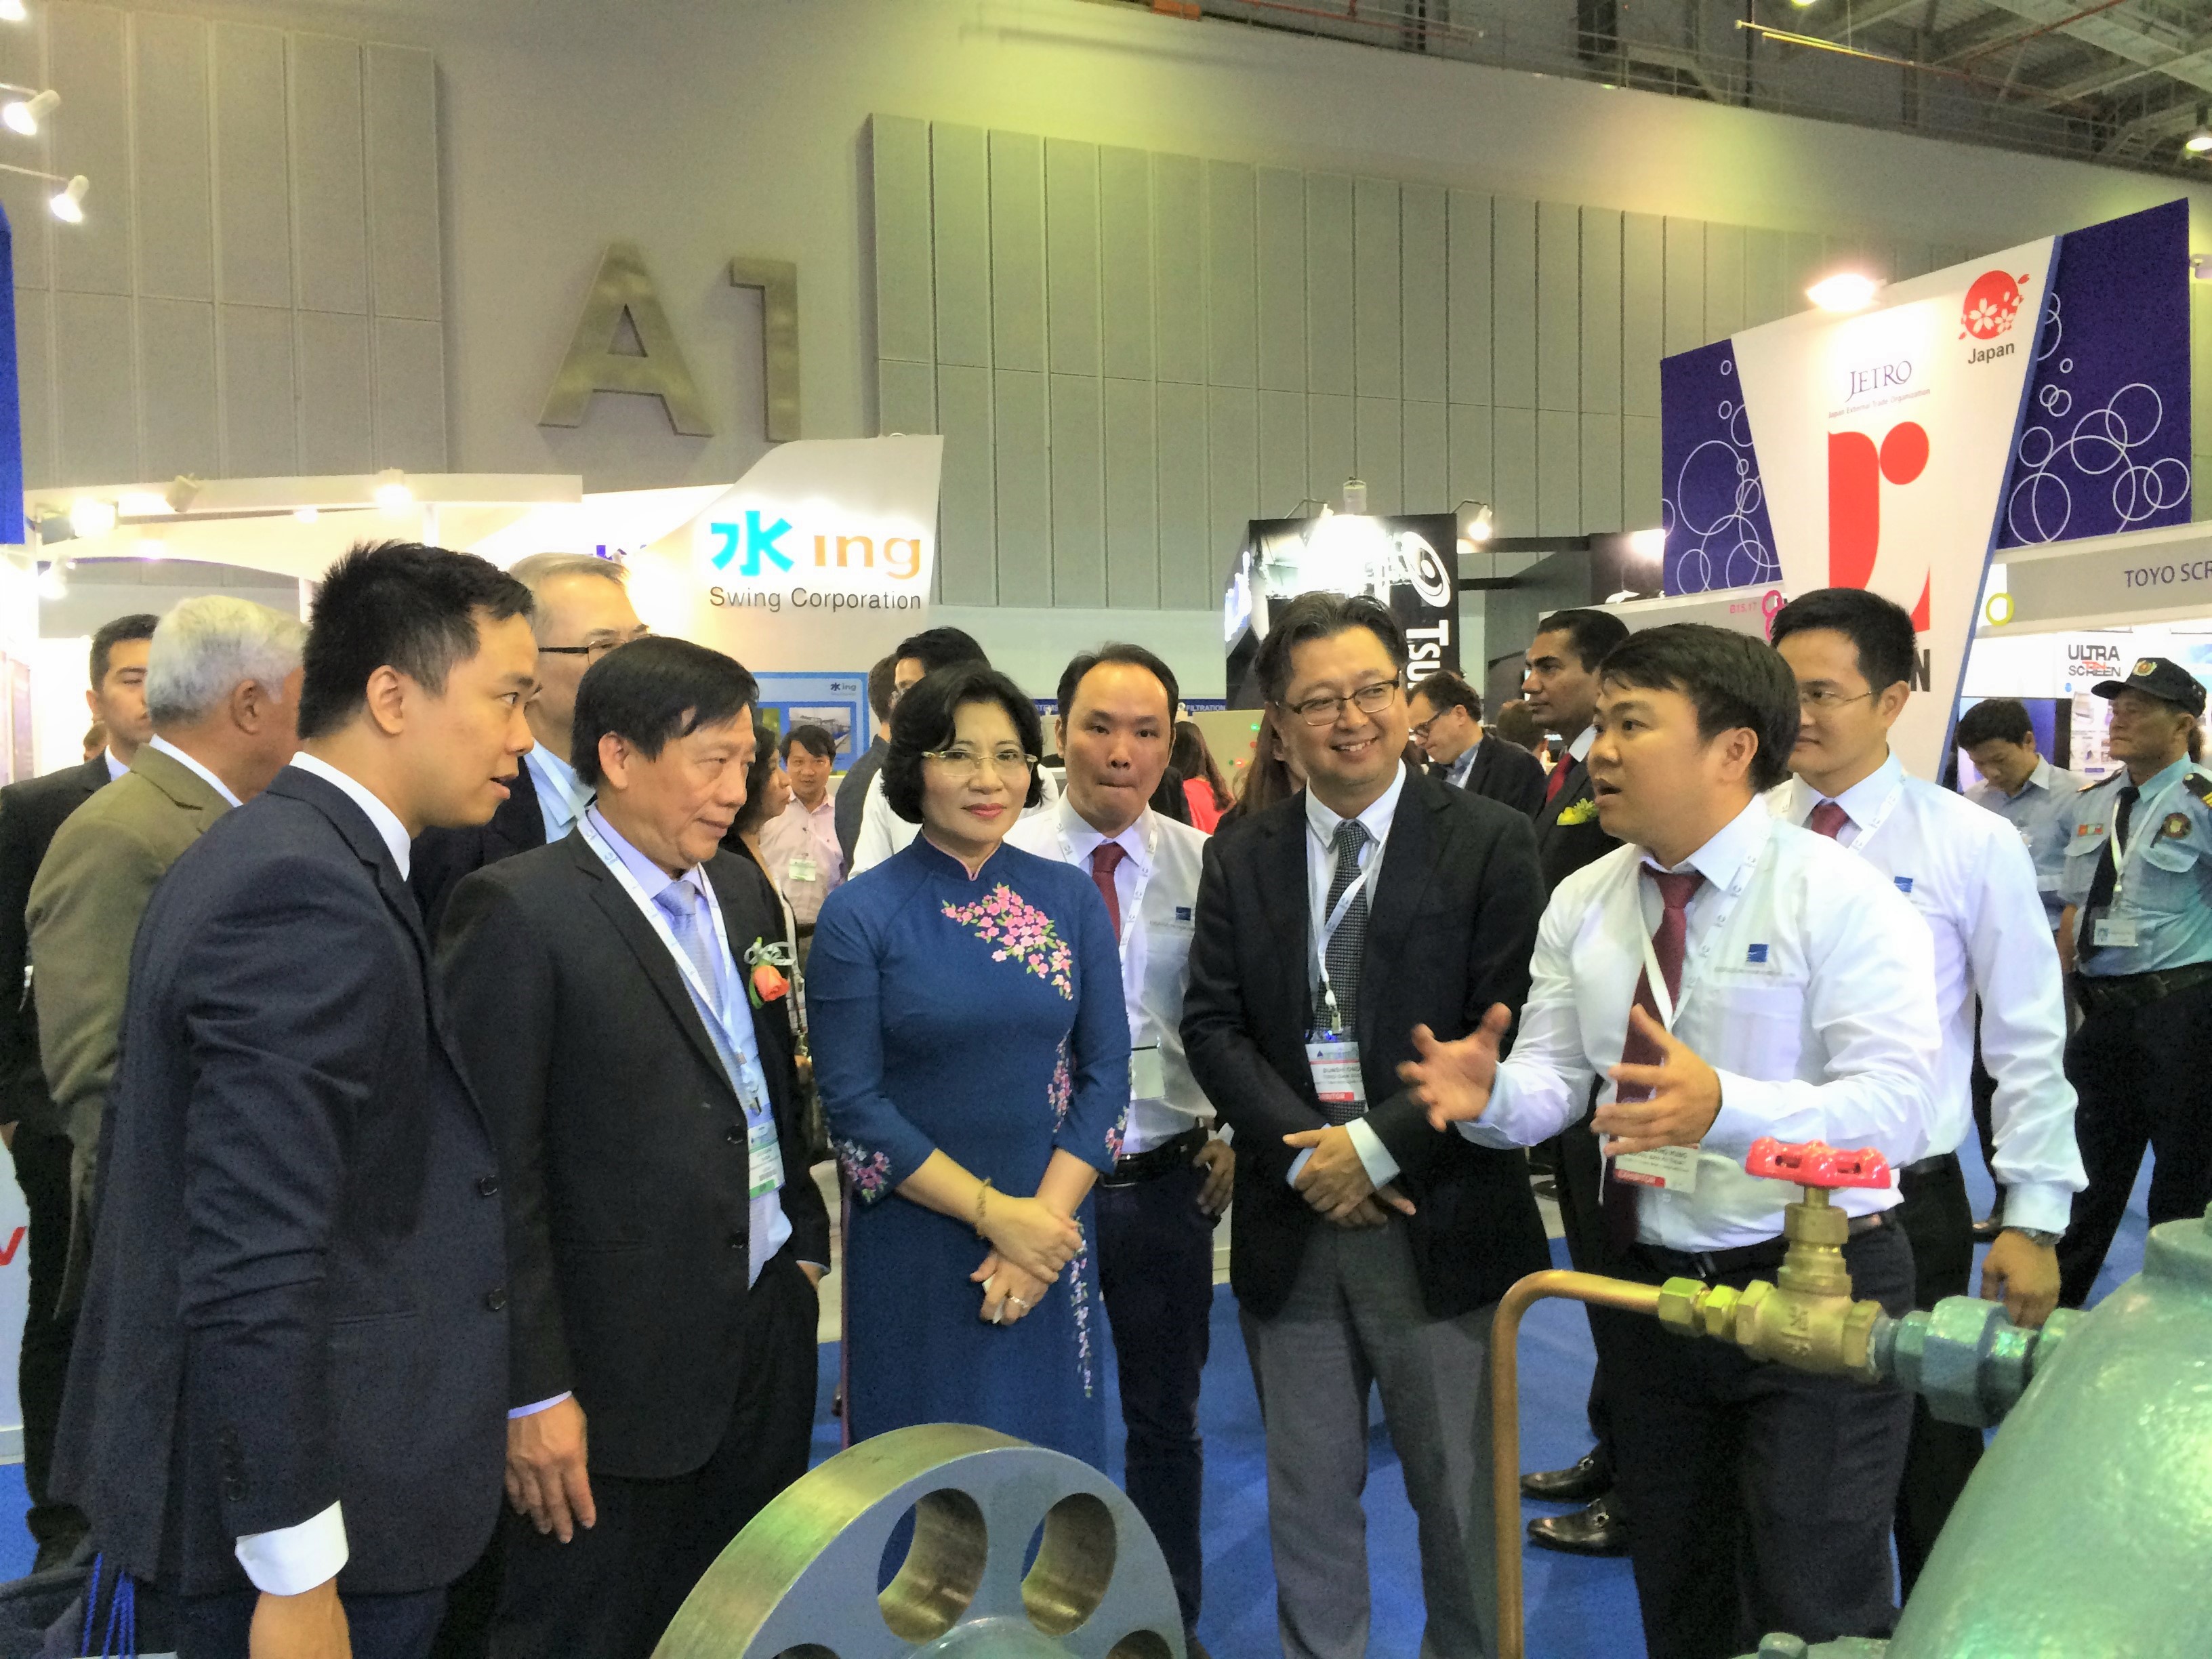 Mrs. Phan Thi My Linh – Vice Minister of Ministry of Construction with CW model